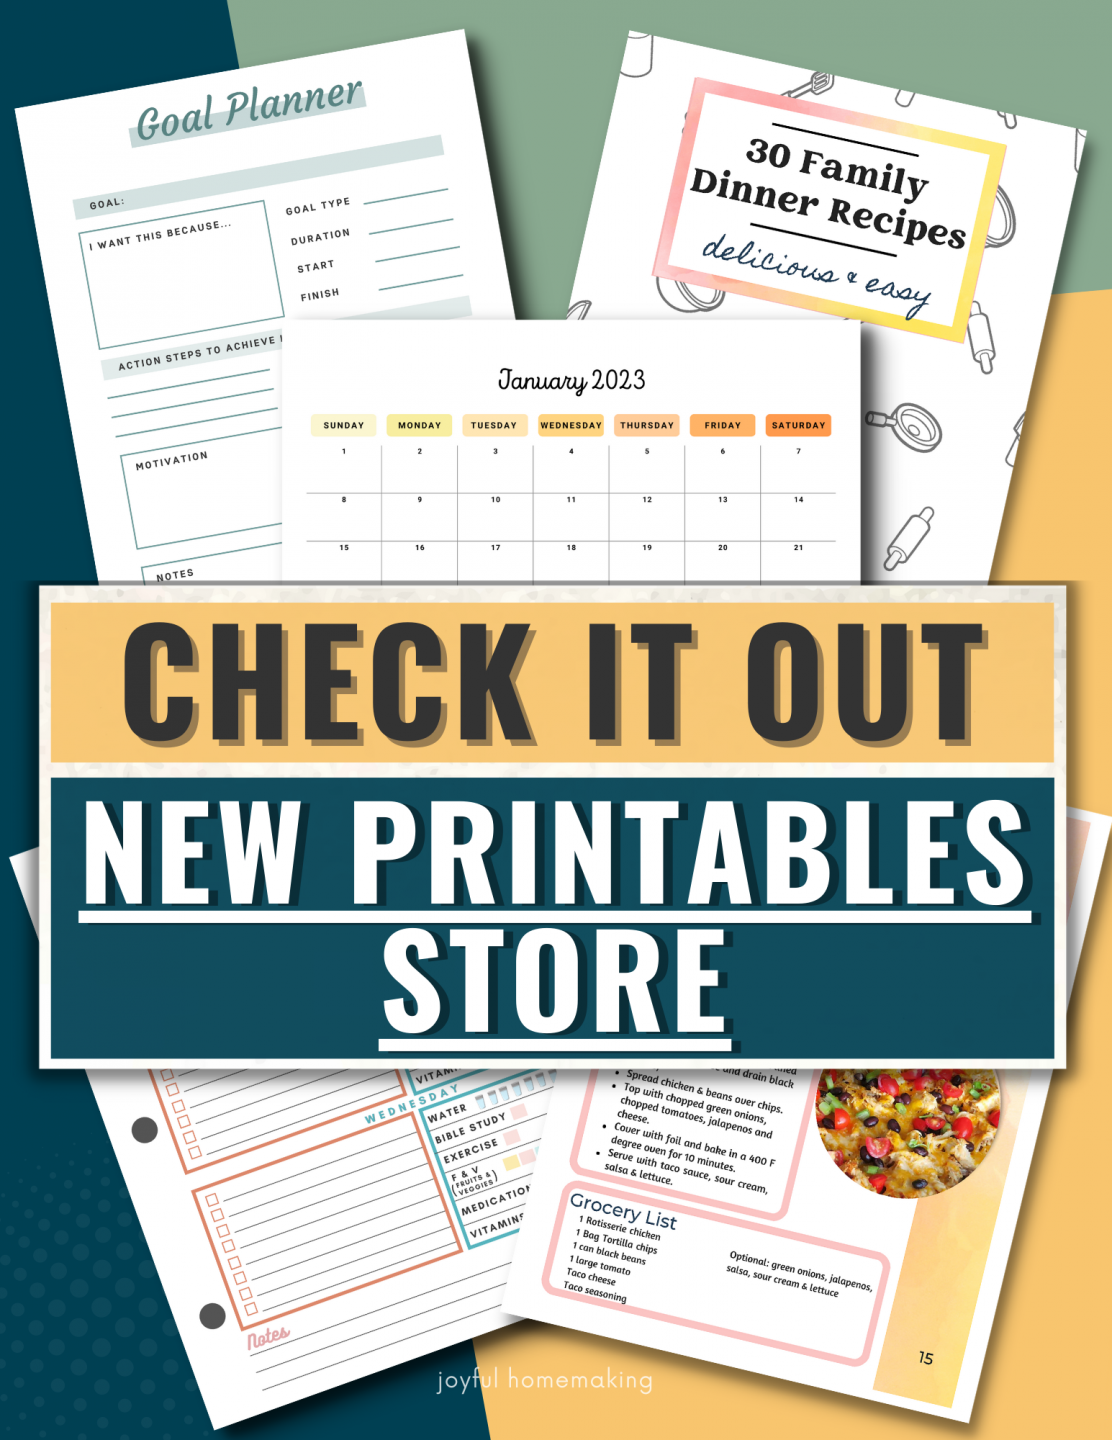 ad for printables store